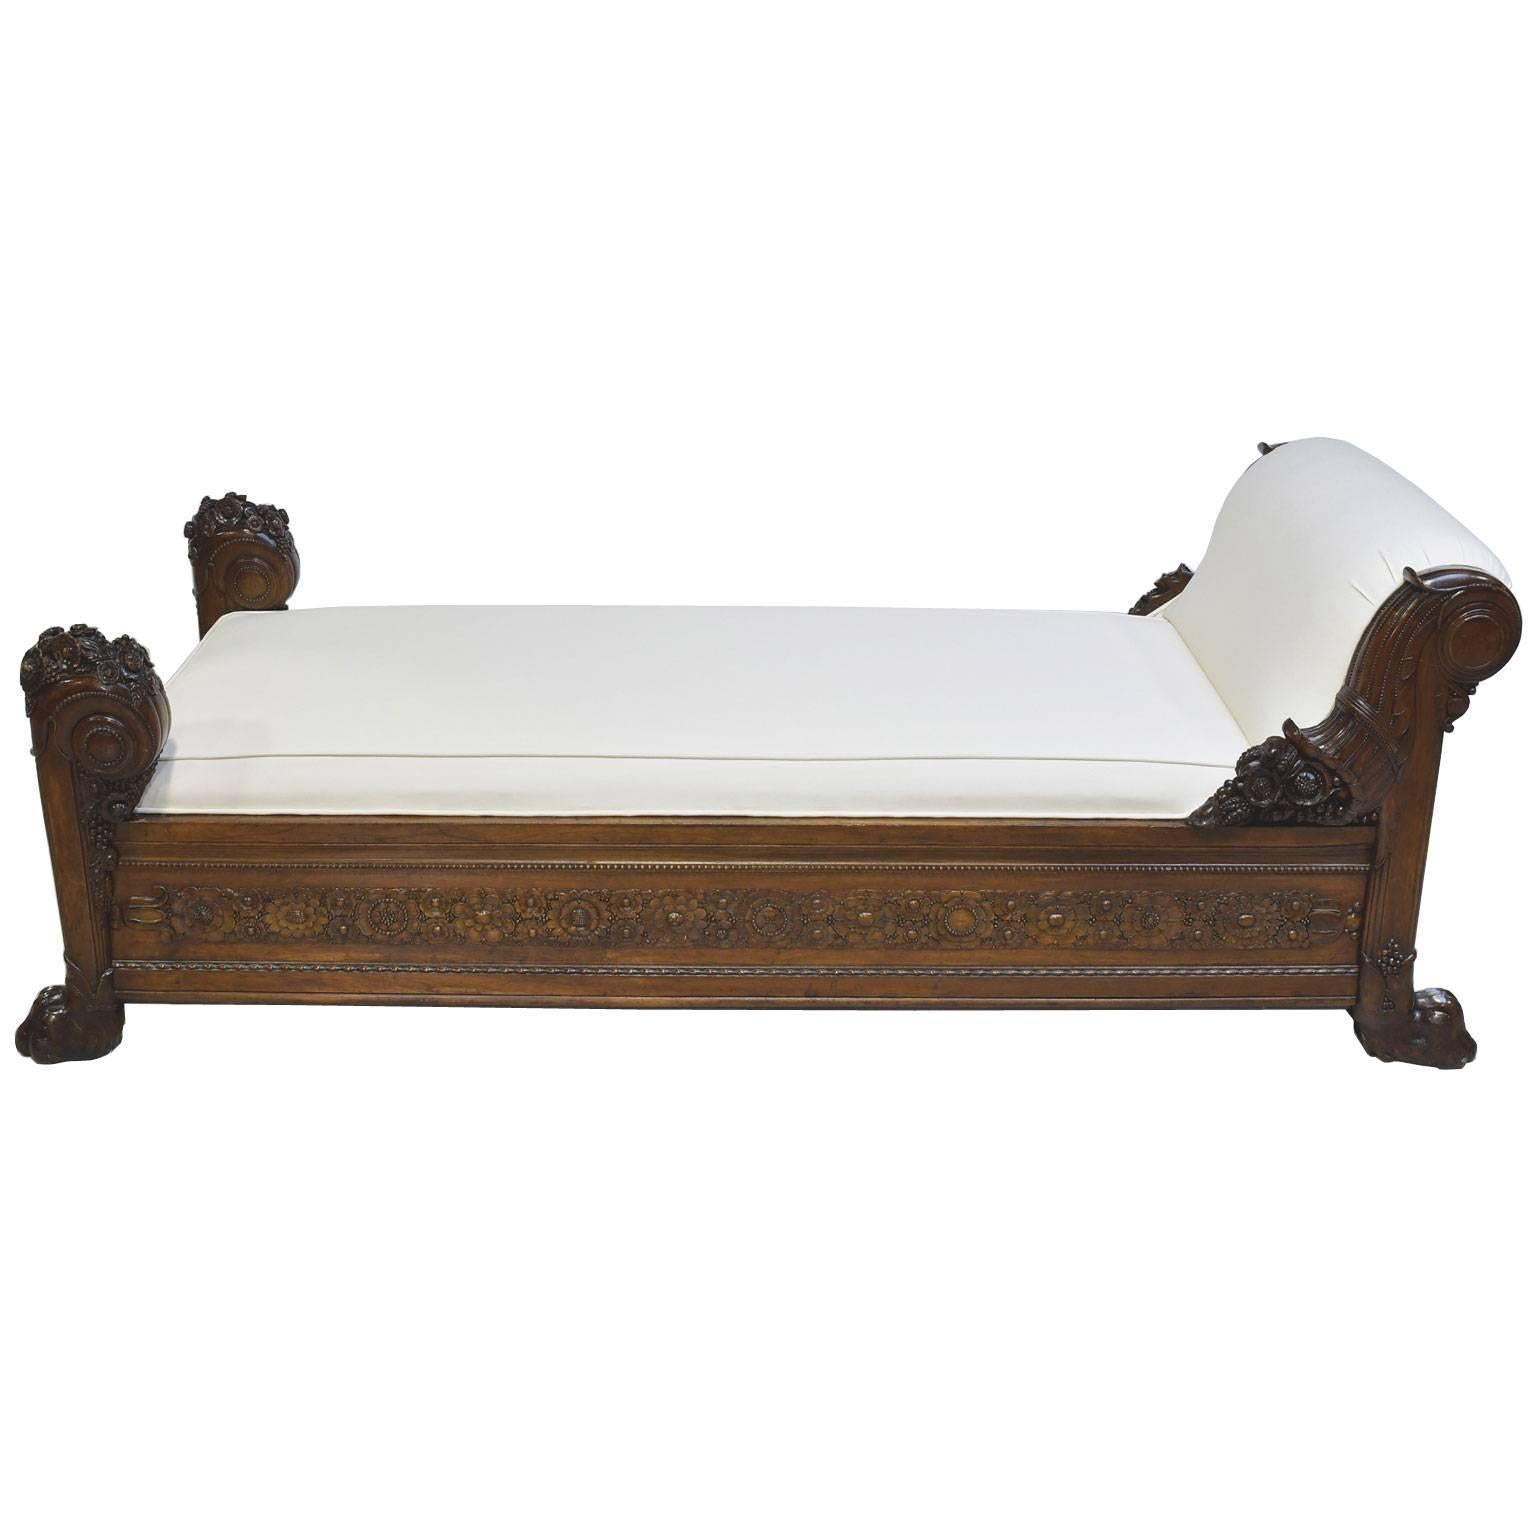 Late 18th Century French Directoire Daybed in Carved Mahogany with Upholstery 10